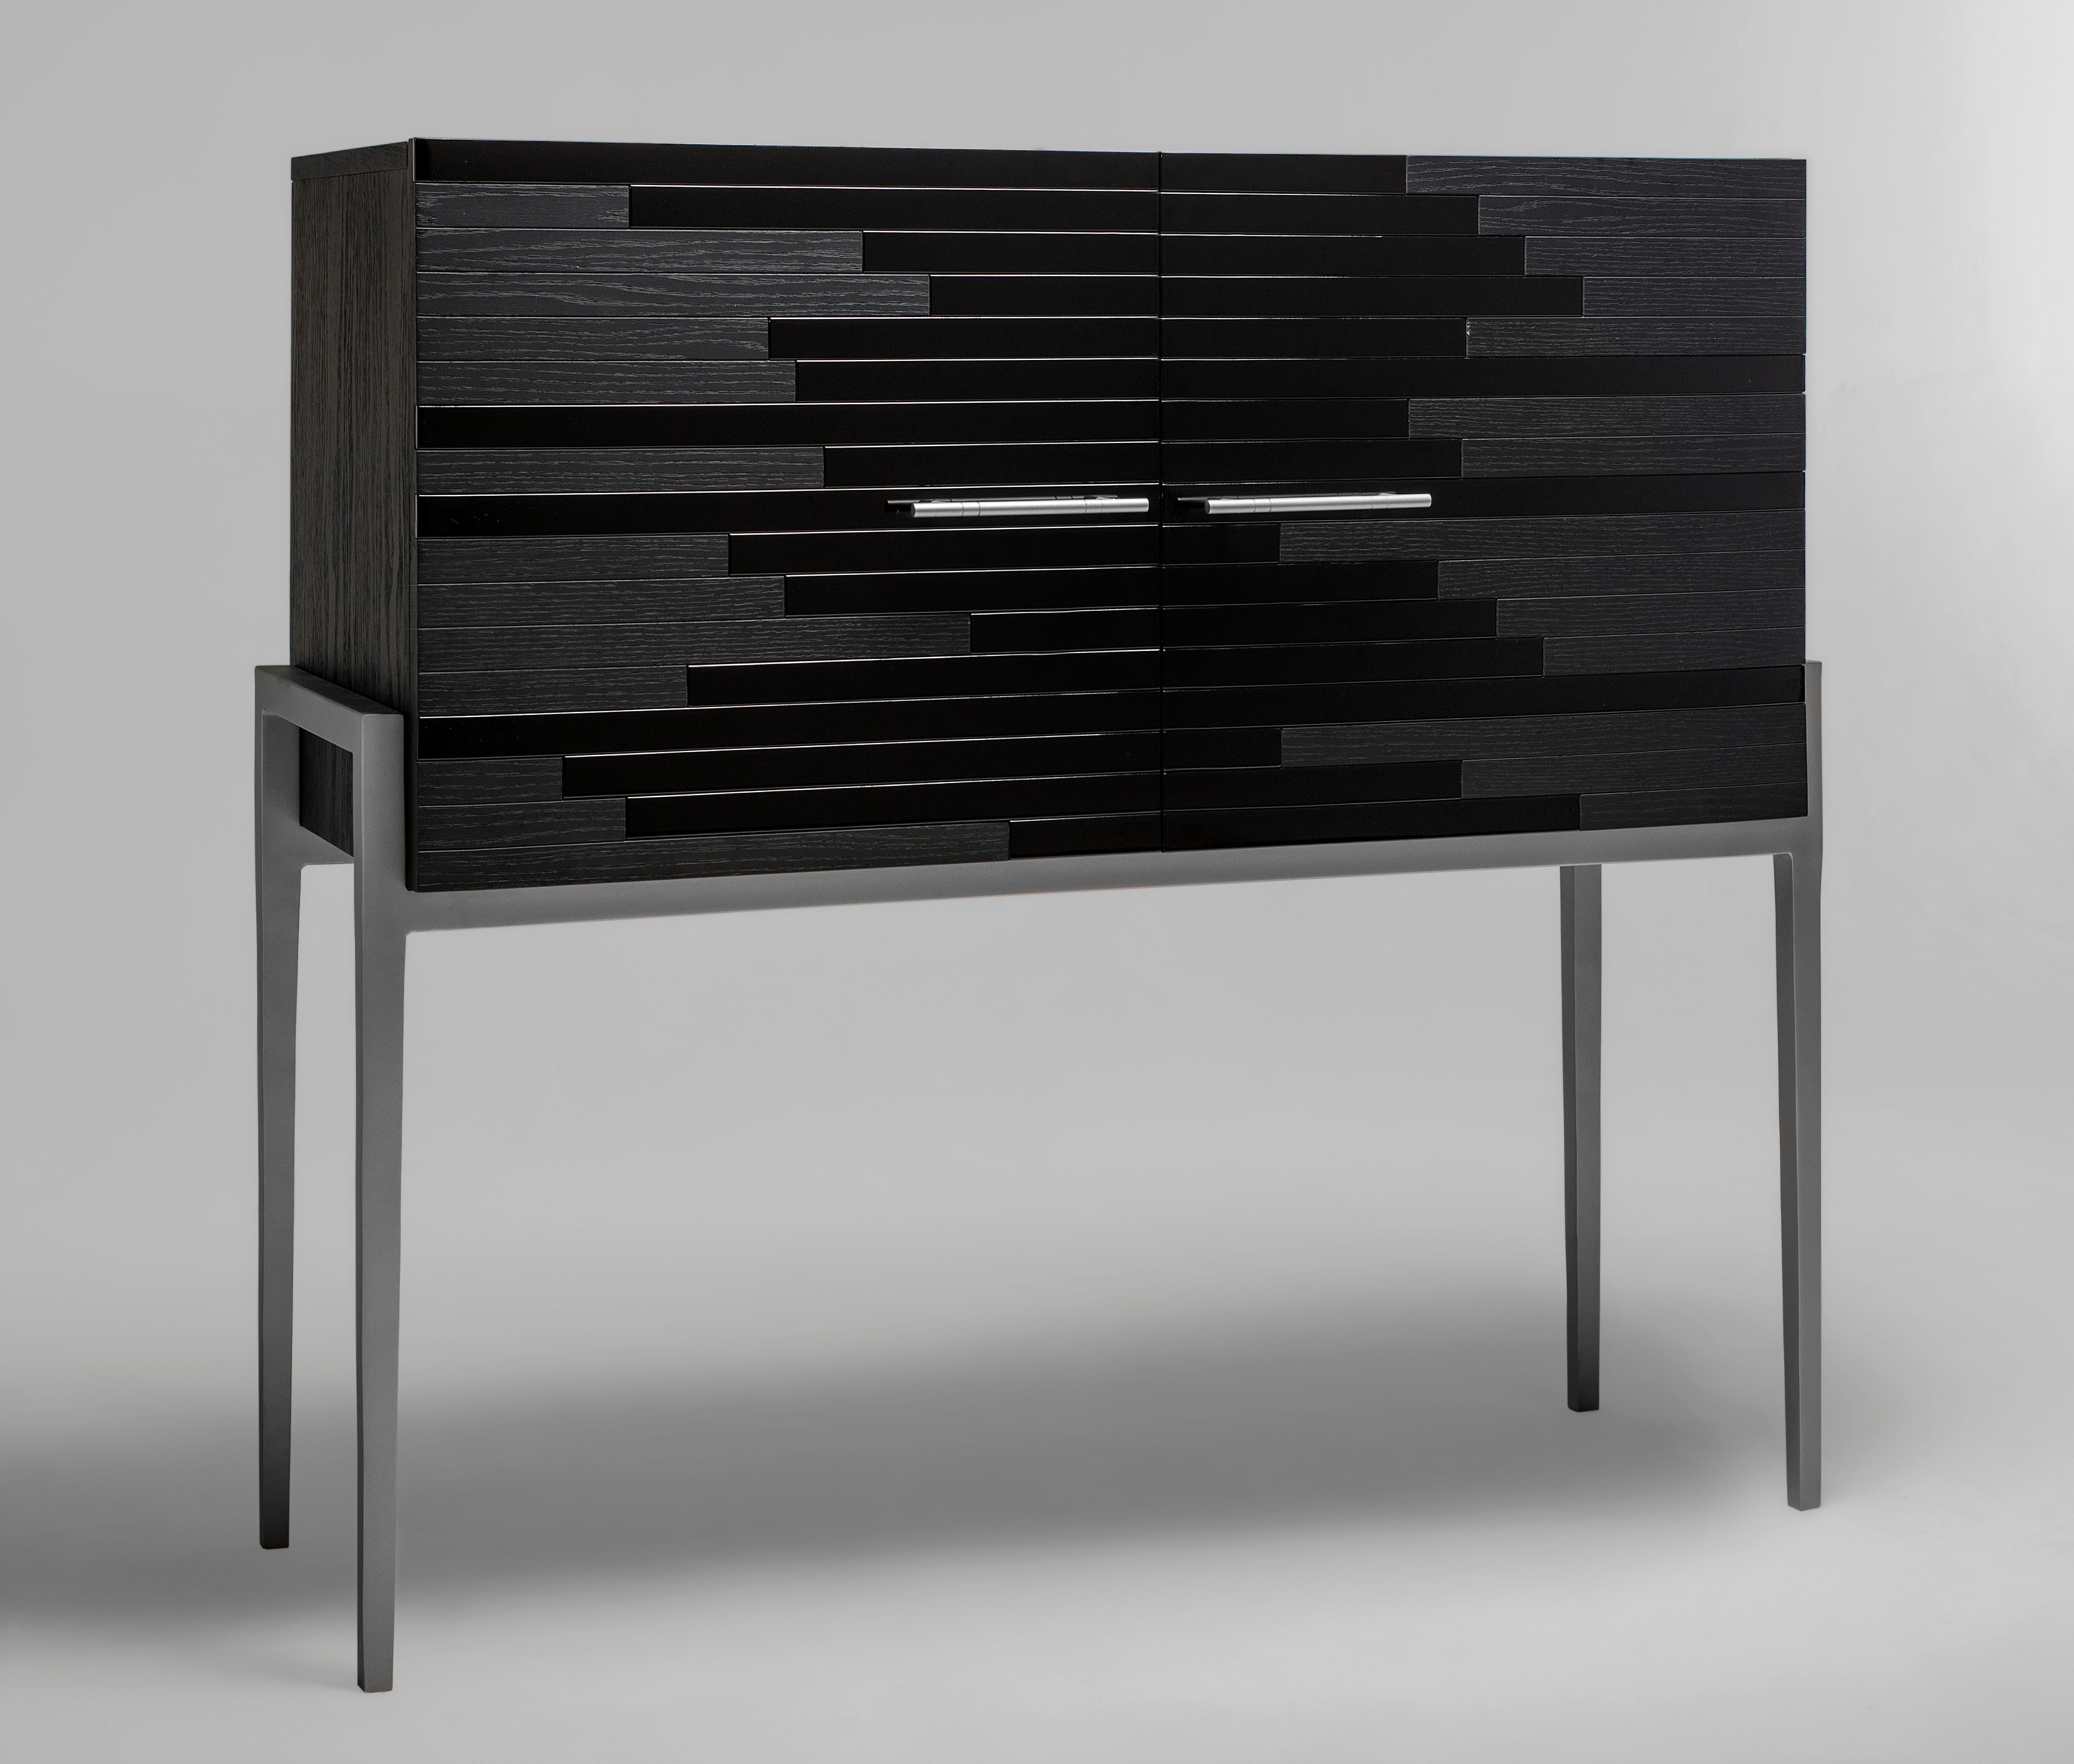 Vind is one of our 'social media hit' high-end furniture designs. Having had such a positive feedback on social media so soon, this cabinet manages to make its presence known even though its design features are both elegant and composed. Its modern